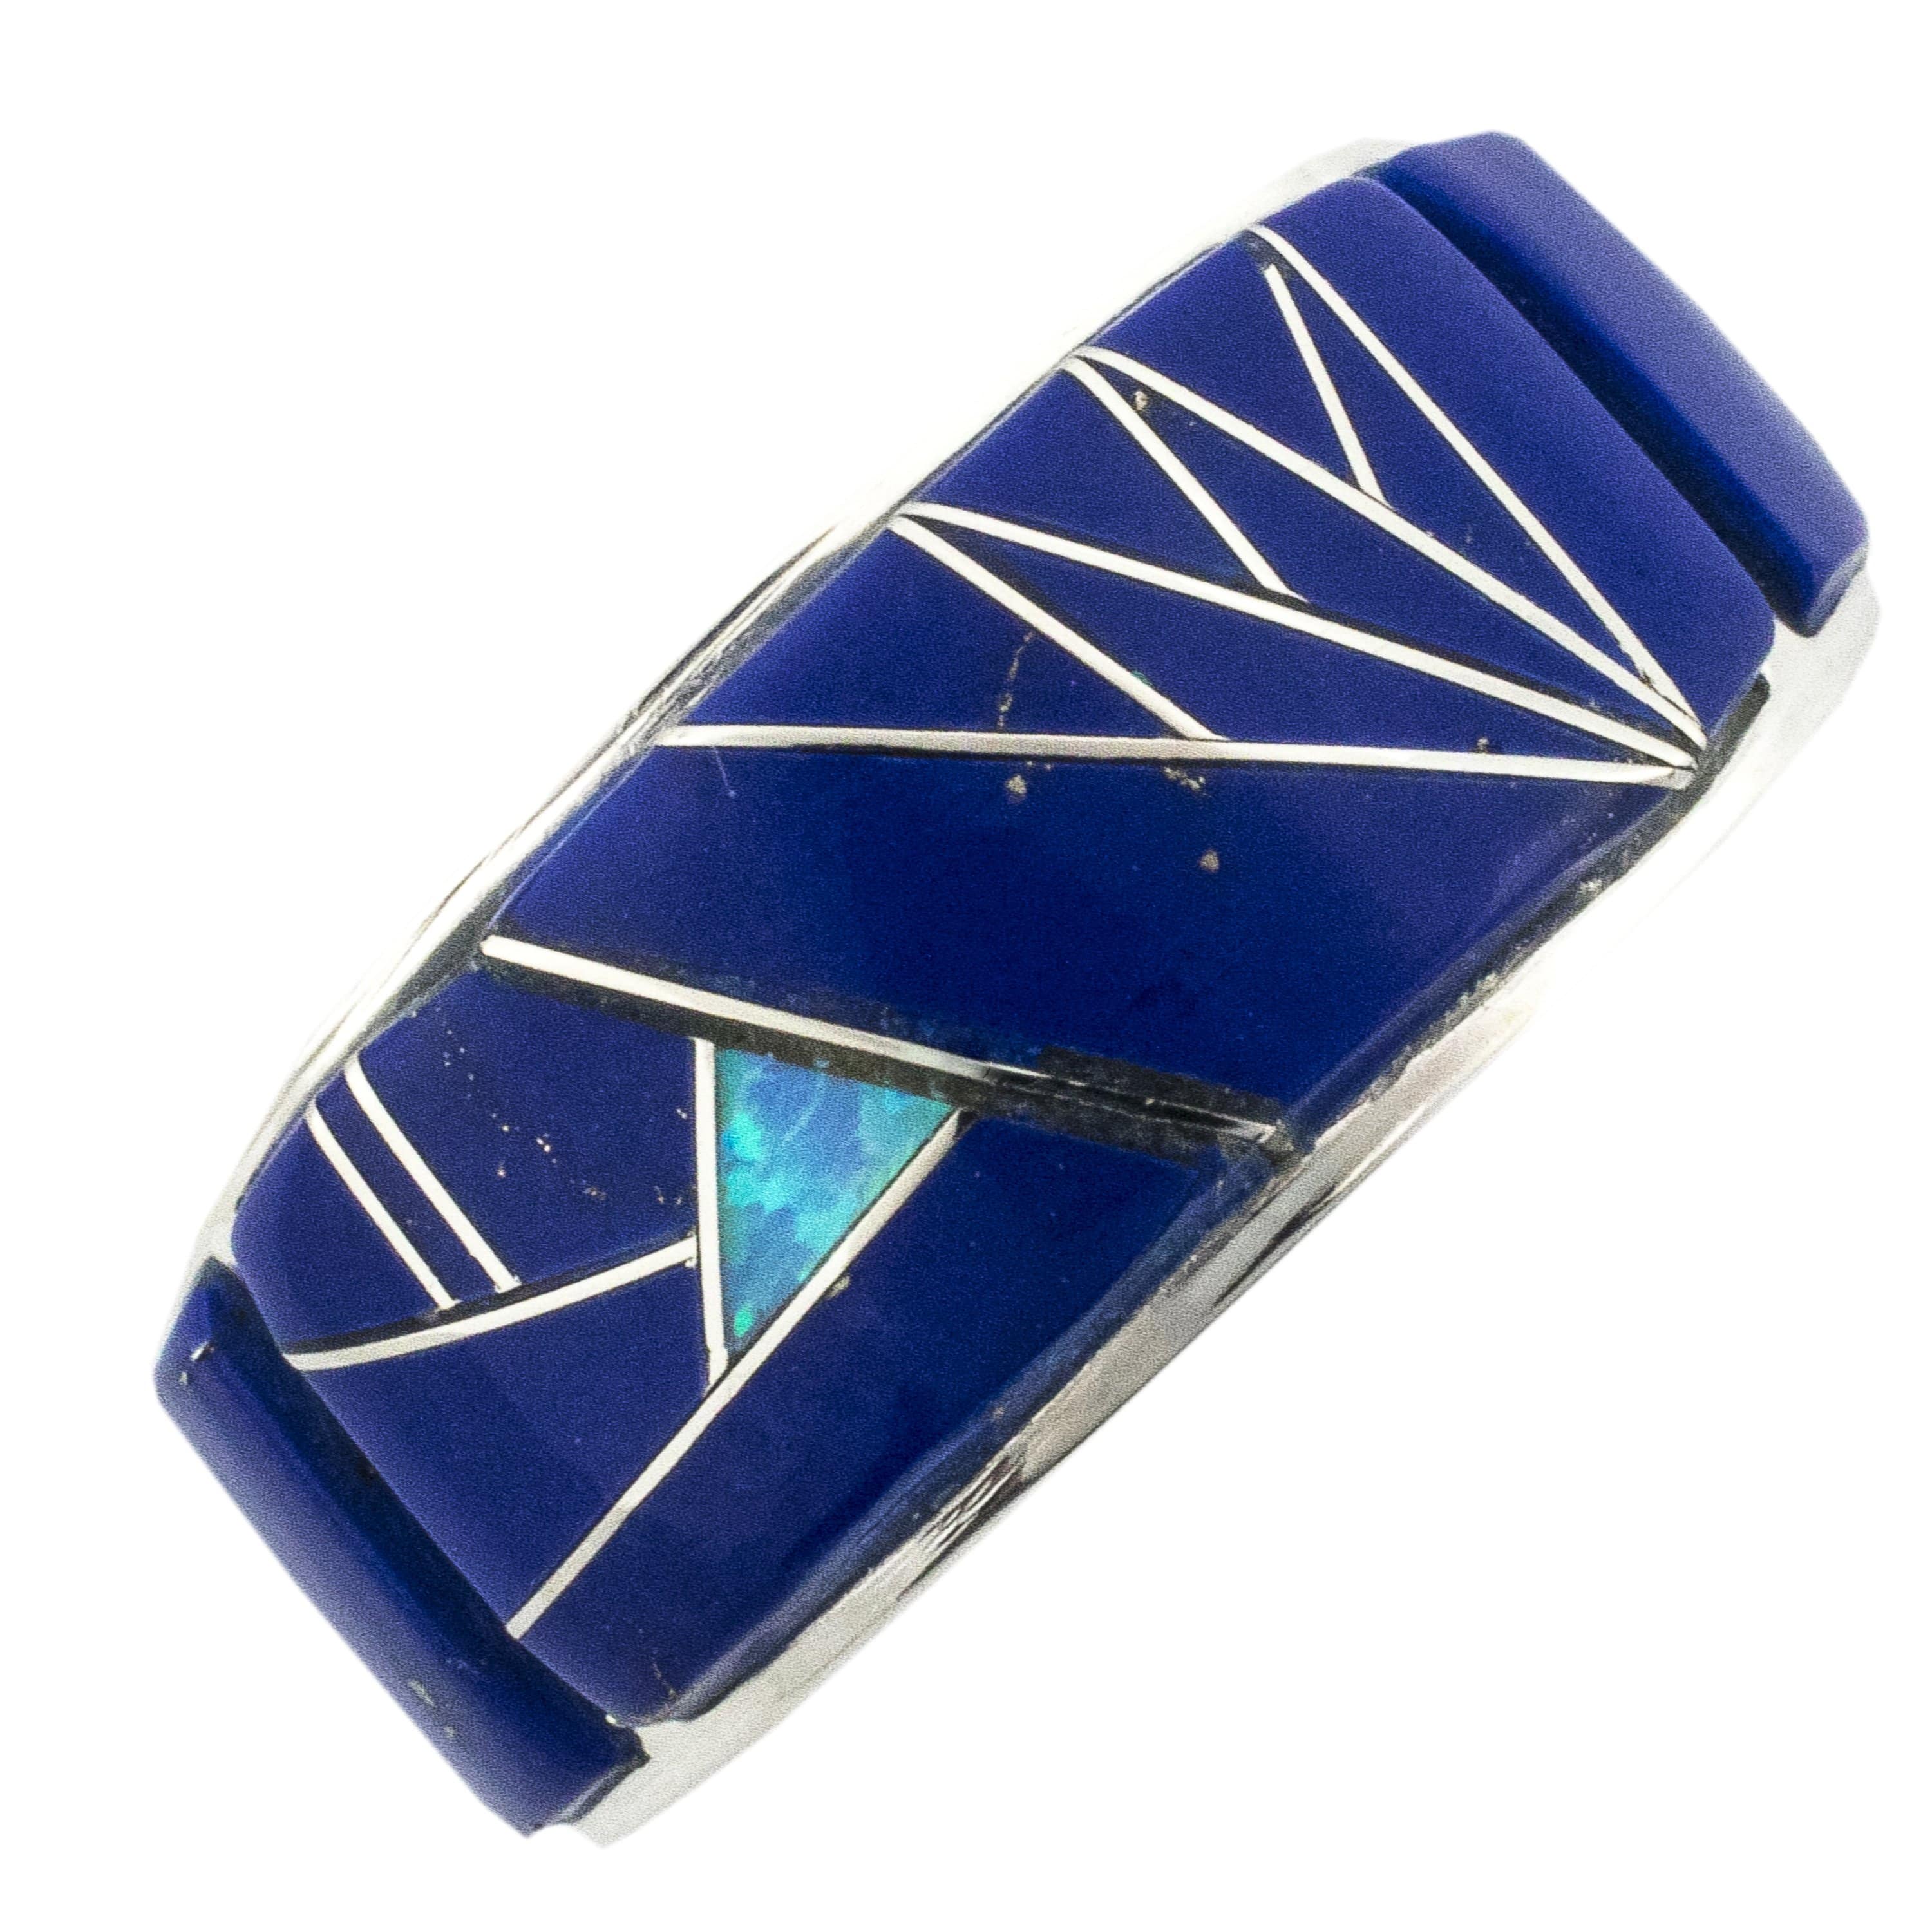 Kalifano Southwest Silver Jewelry Lapis 925 Sterling Silver Ring USA Handmade with Laboratory Opal Accent